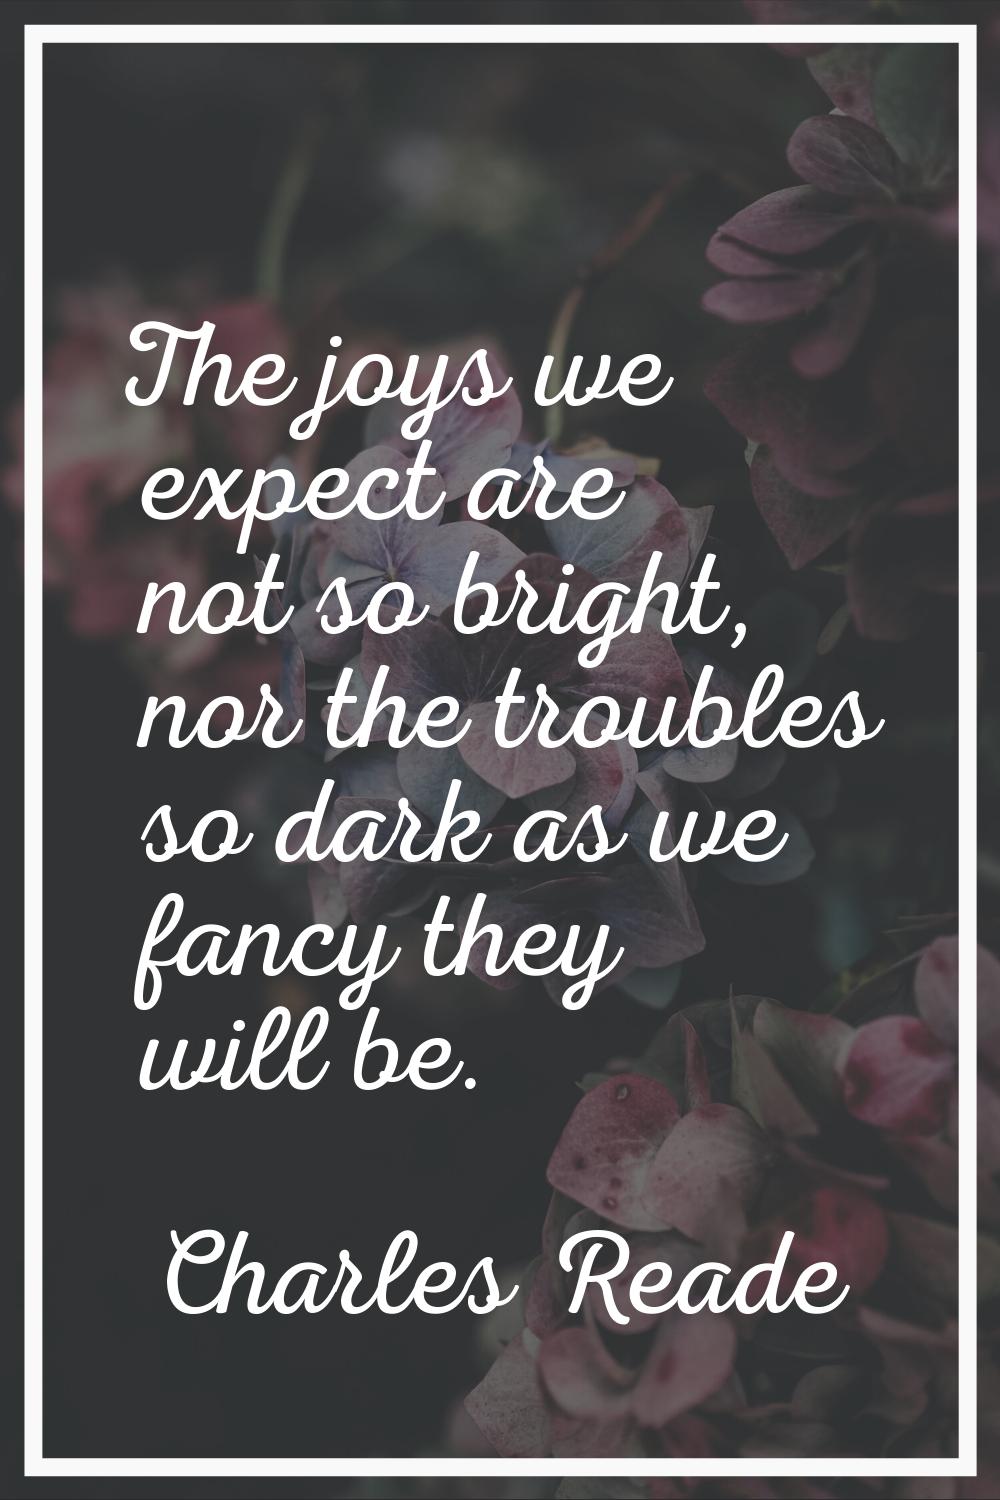 The joys we expect are not so bright, nor the troubles so dark as we fancy they will be.